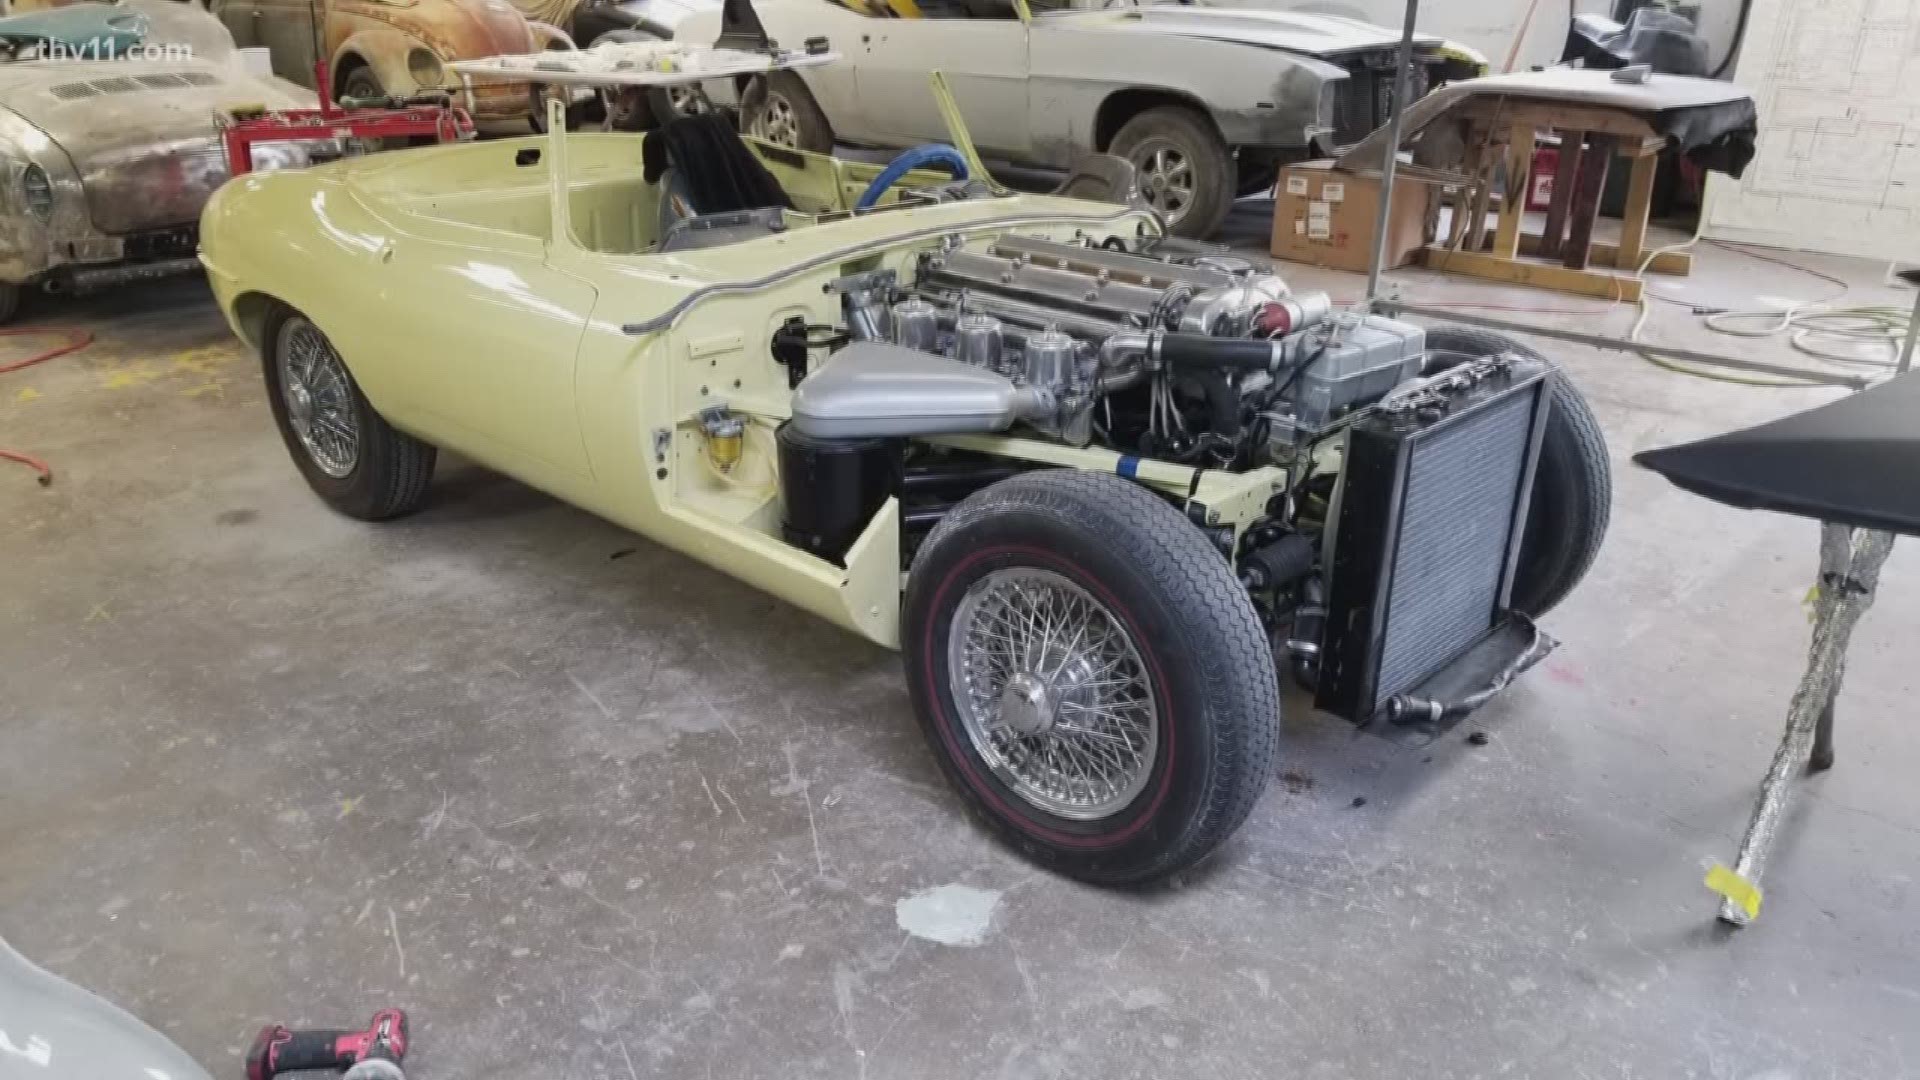 Restoring expensive cars to glory is a business that comes with a lot of interesting stories.